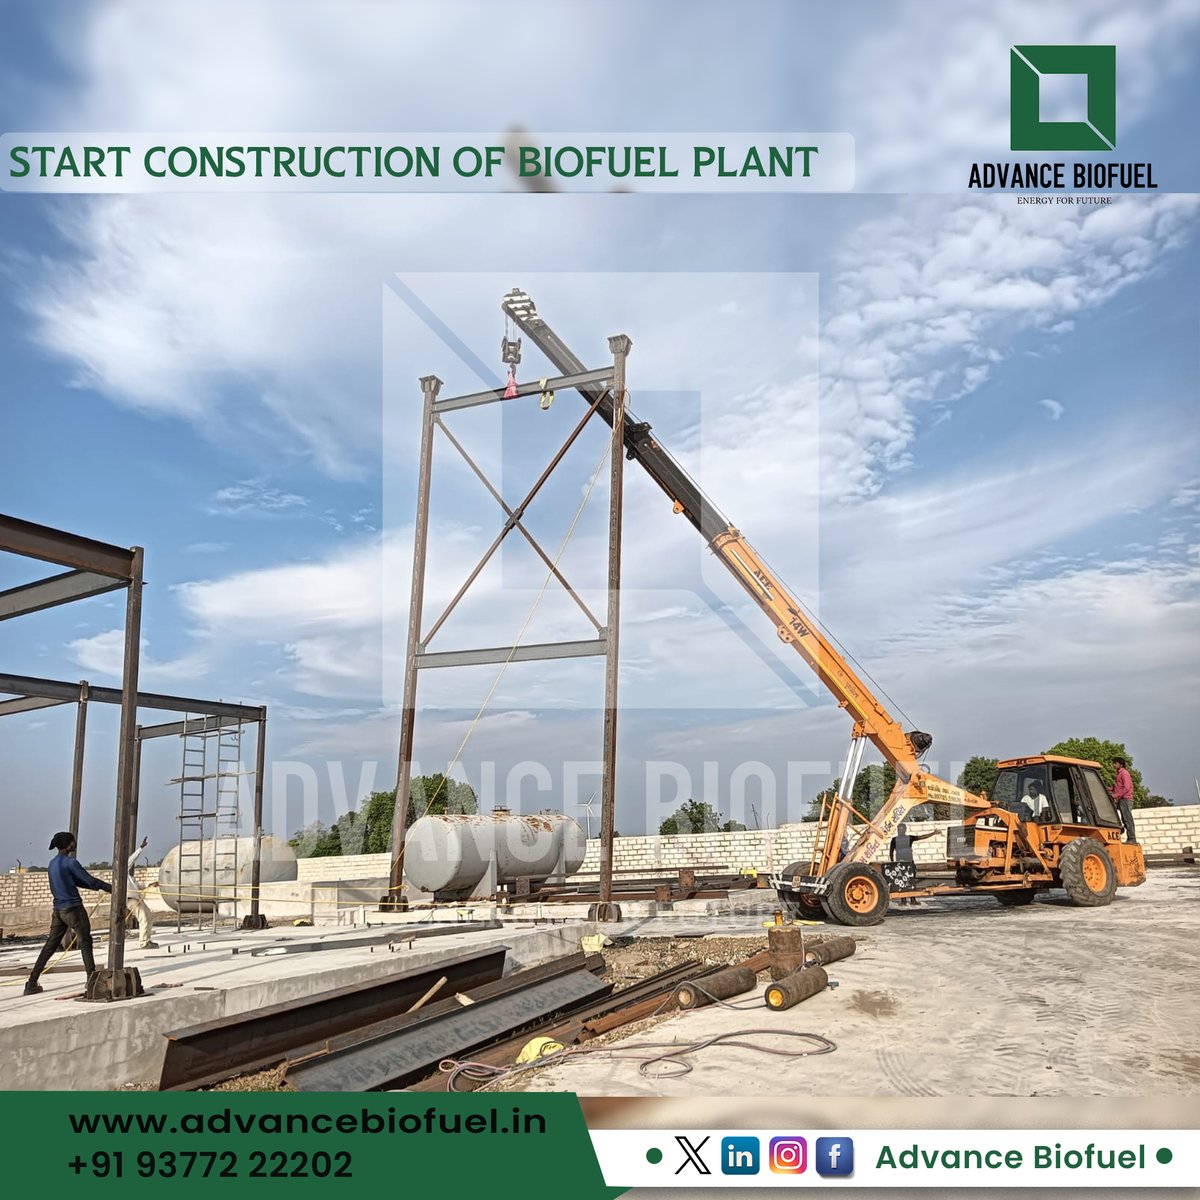 Eco-evolution in the making! 🌿⚙️ Excited to announce that our biofuel plant is currently under construction, shaping a more sustainable energy landscape. 

#AdvancedBiofuel #EcoFriendlySolutions #GreenLiving #CleanFuel #SustainableDevelopment #FuelingChange #FutureOfEnergy